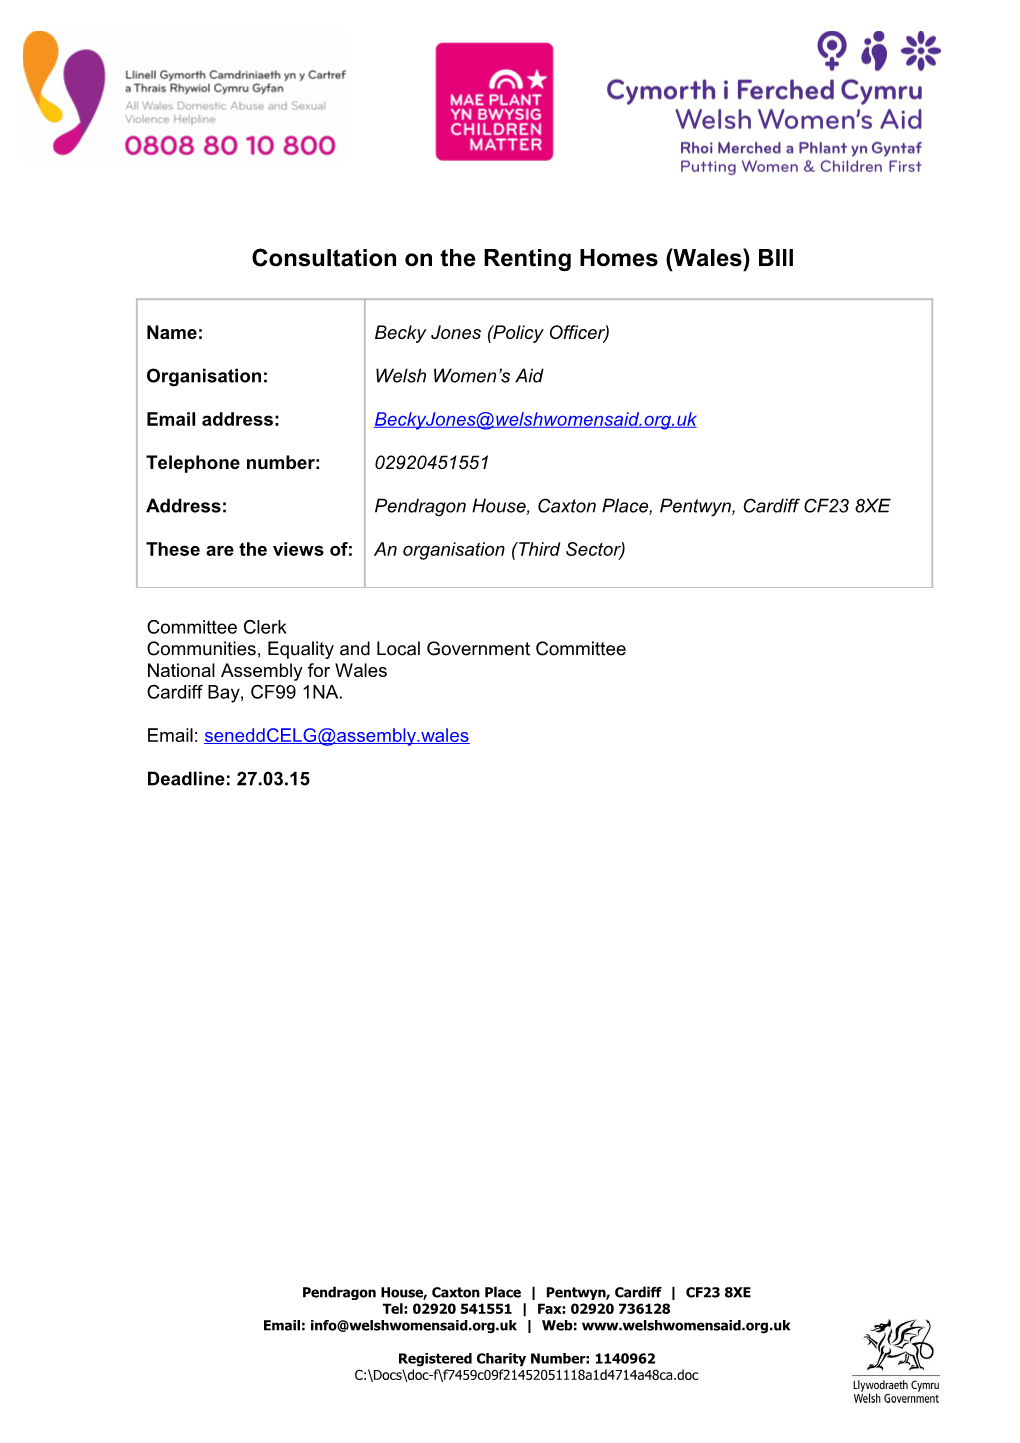 Consultation on the Renting Homes (Wales) Bill